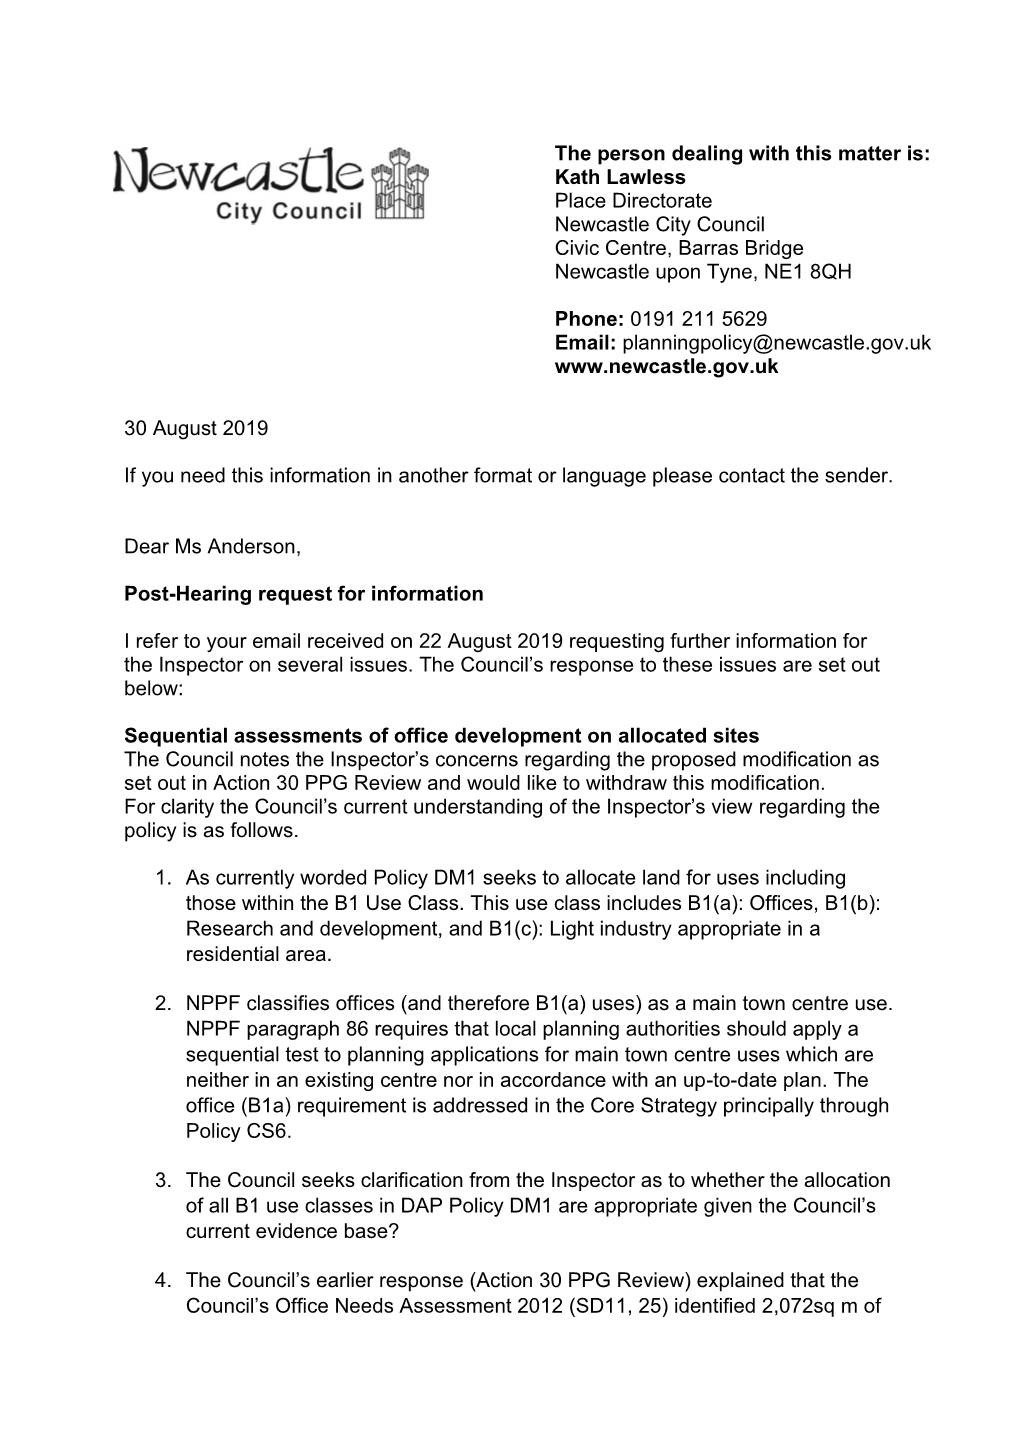 Council Post Hearing Information Letter